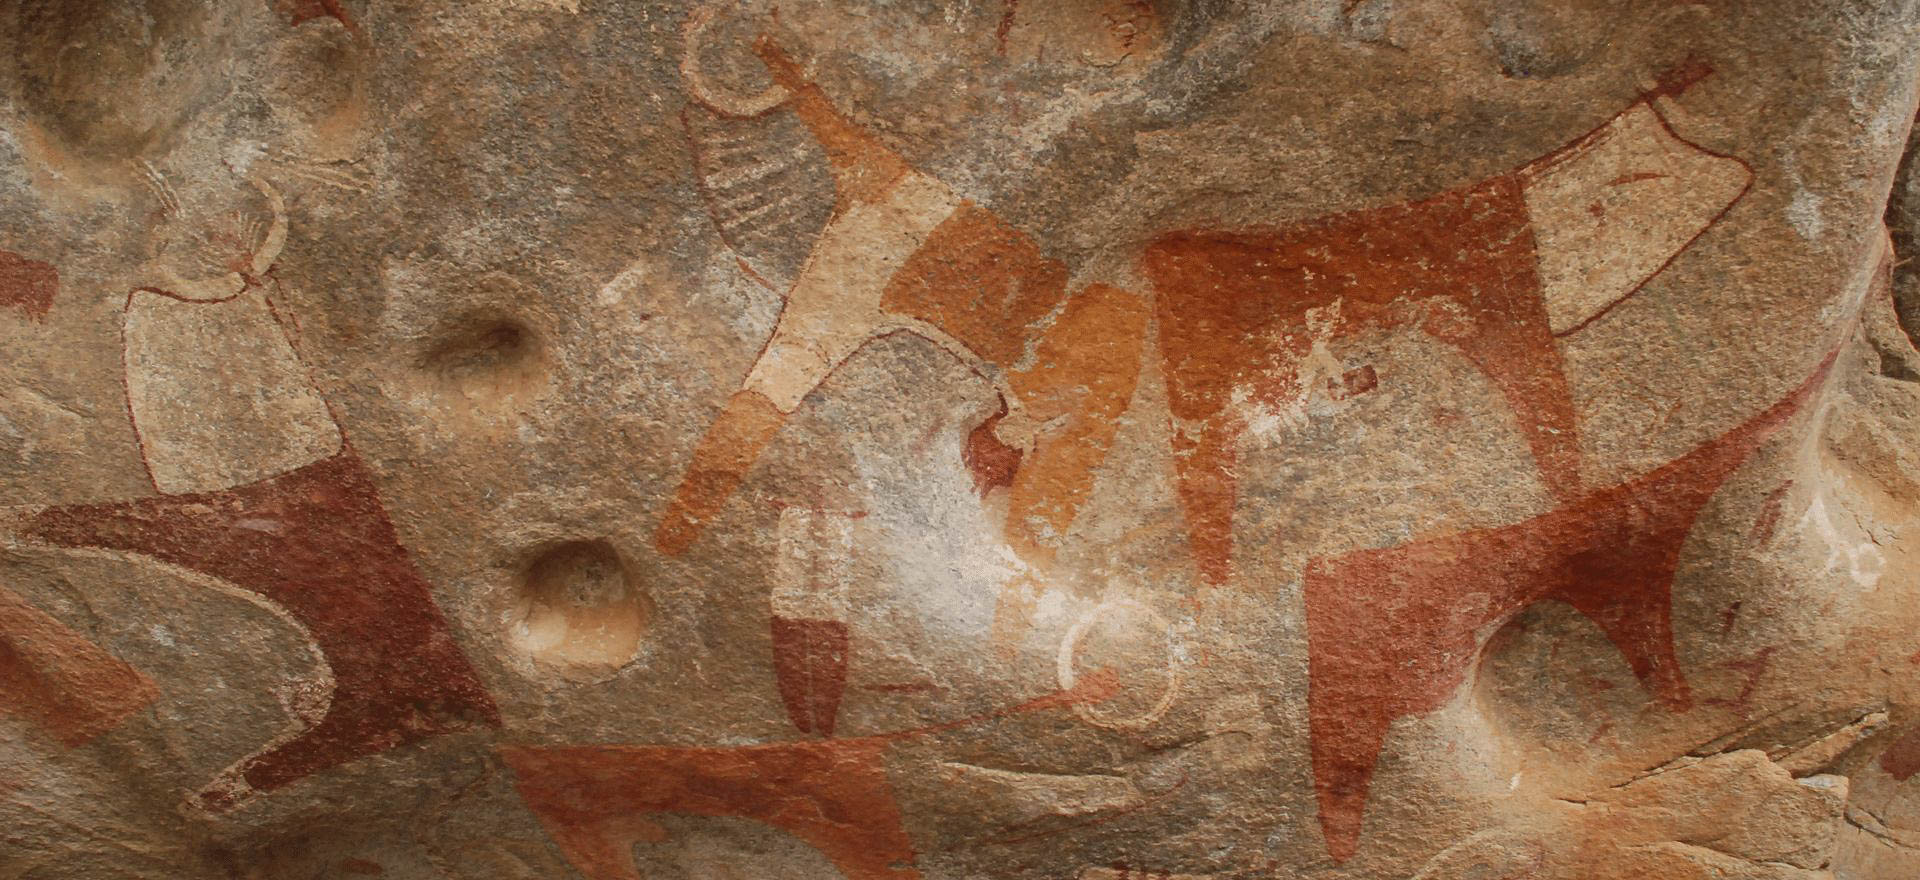 Rock art in Las Geel - Somaliland Holidays and Tours